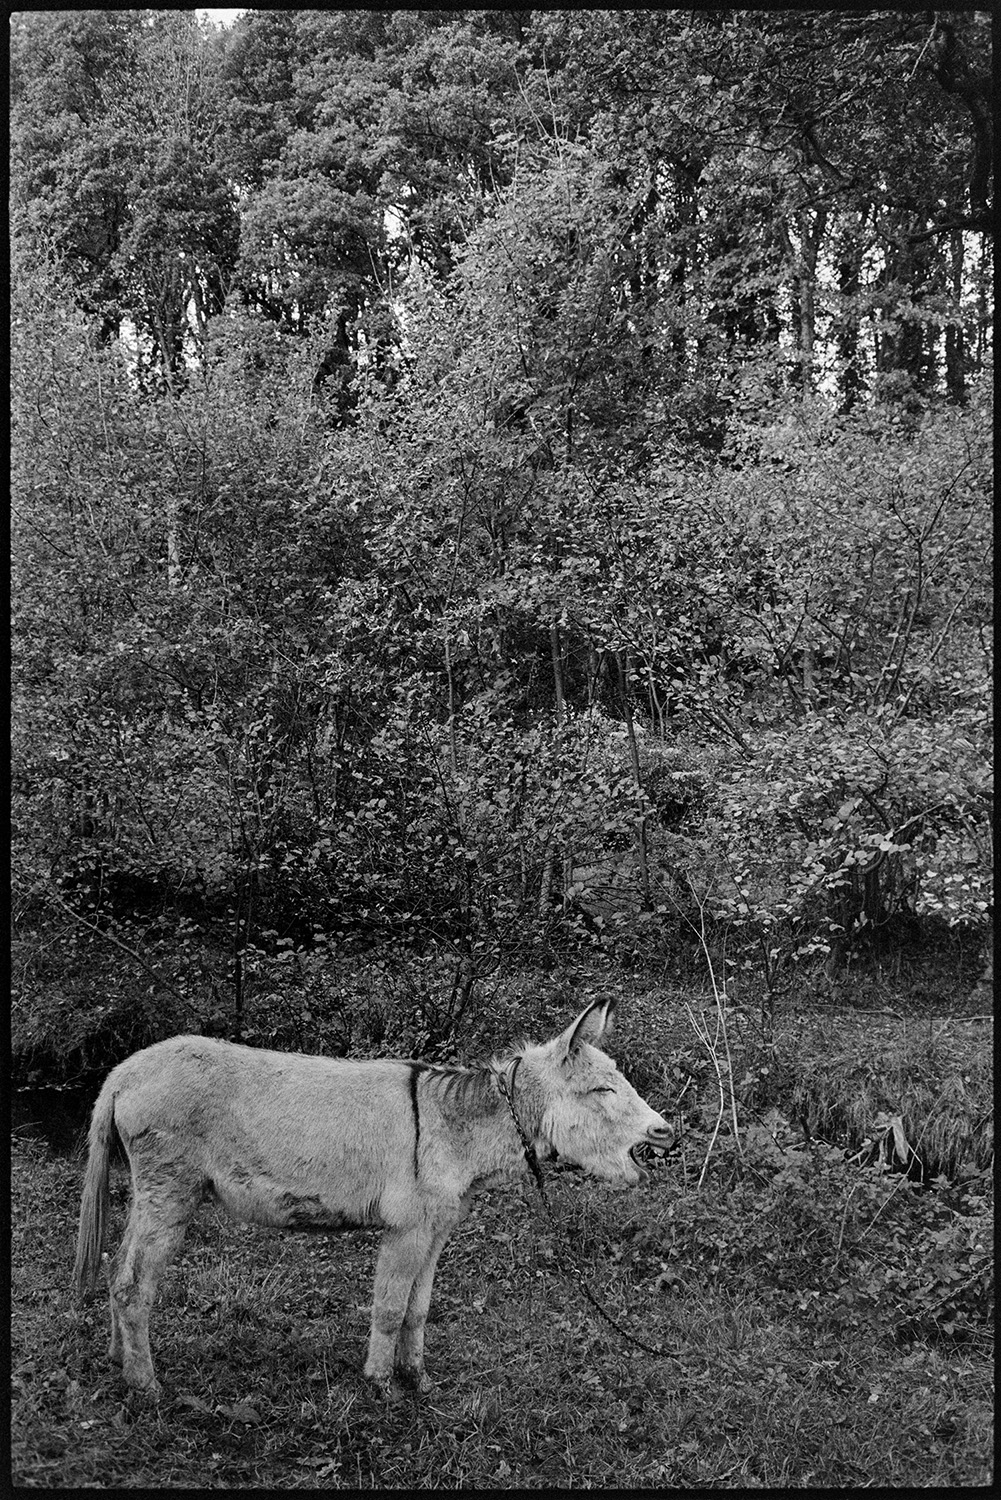 Pig and donkey. 
[A donkey braying in a field surrounded by trees at Dolton.]